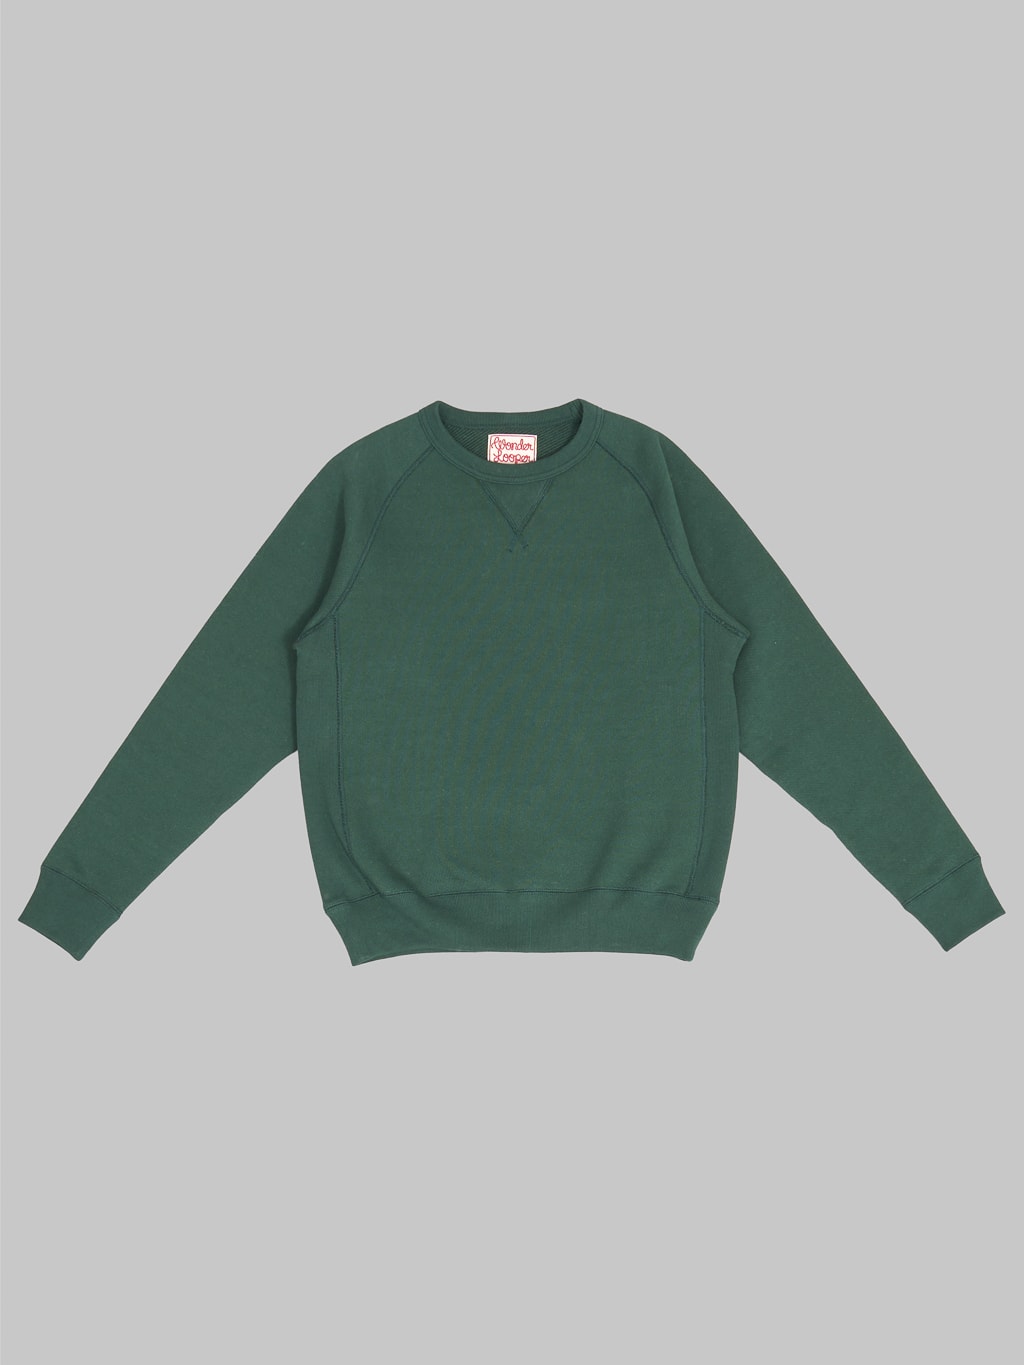 Wonder Looper Pullover Crewneck Double Heavyweight French Terry green front fit